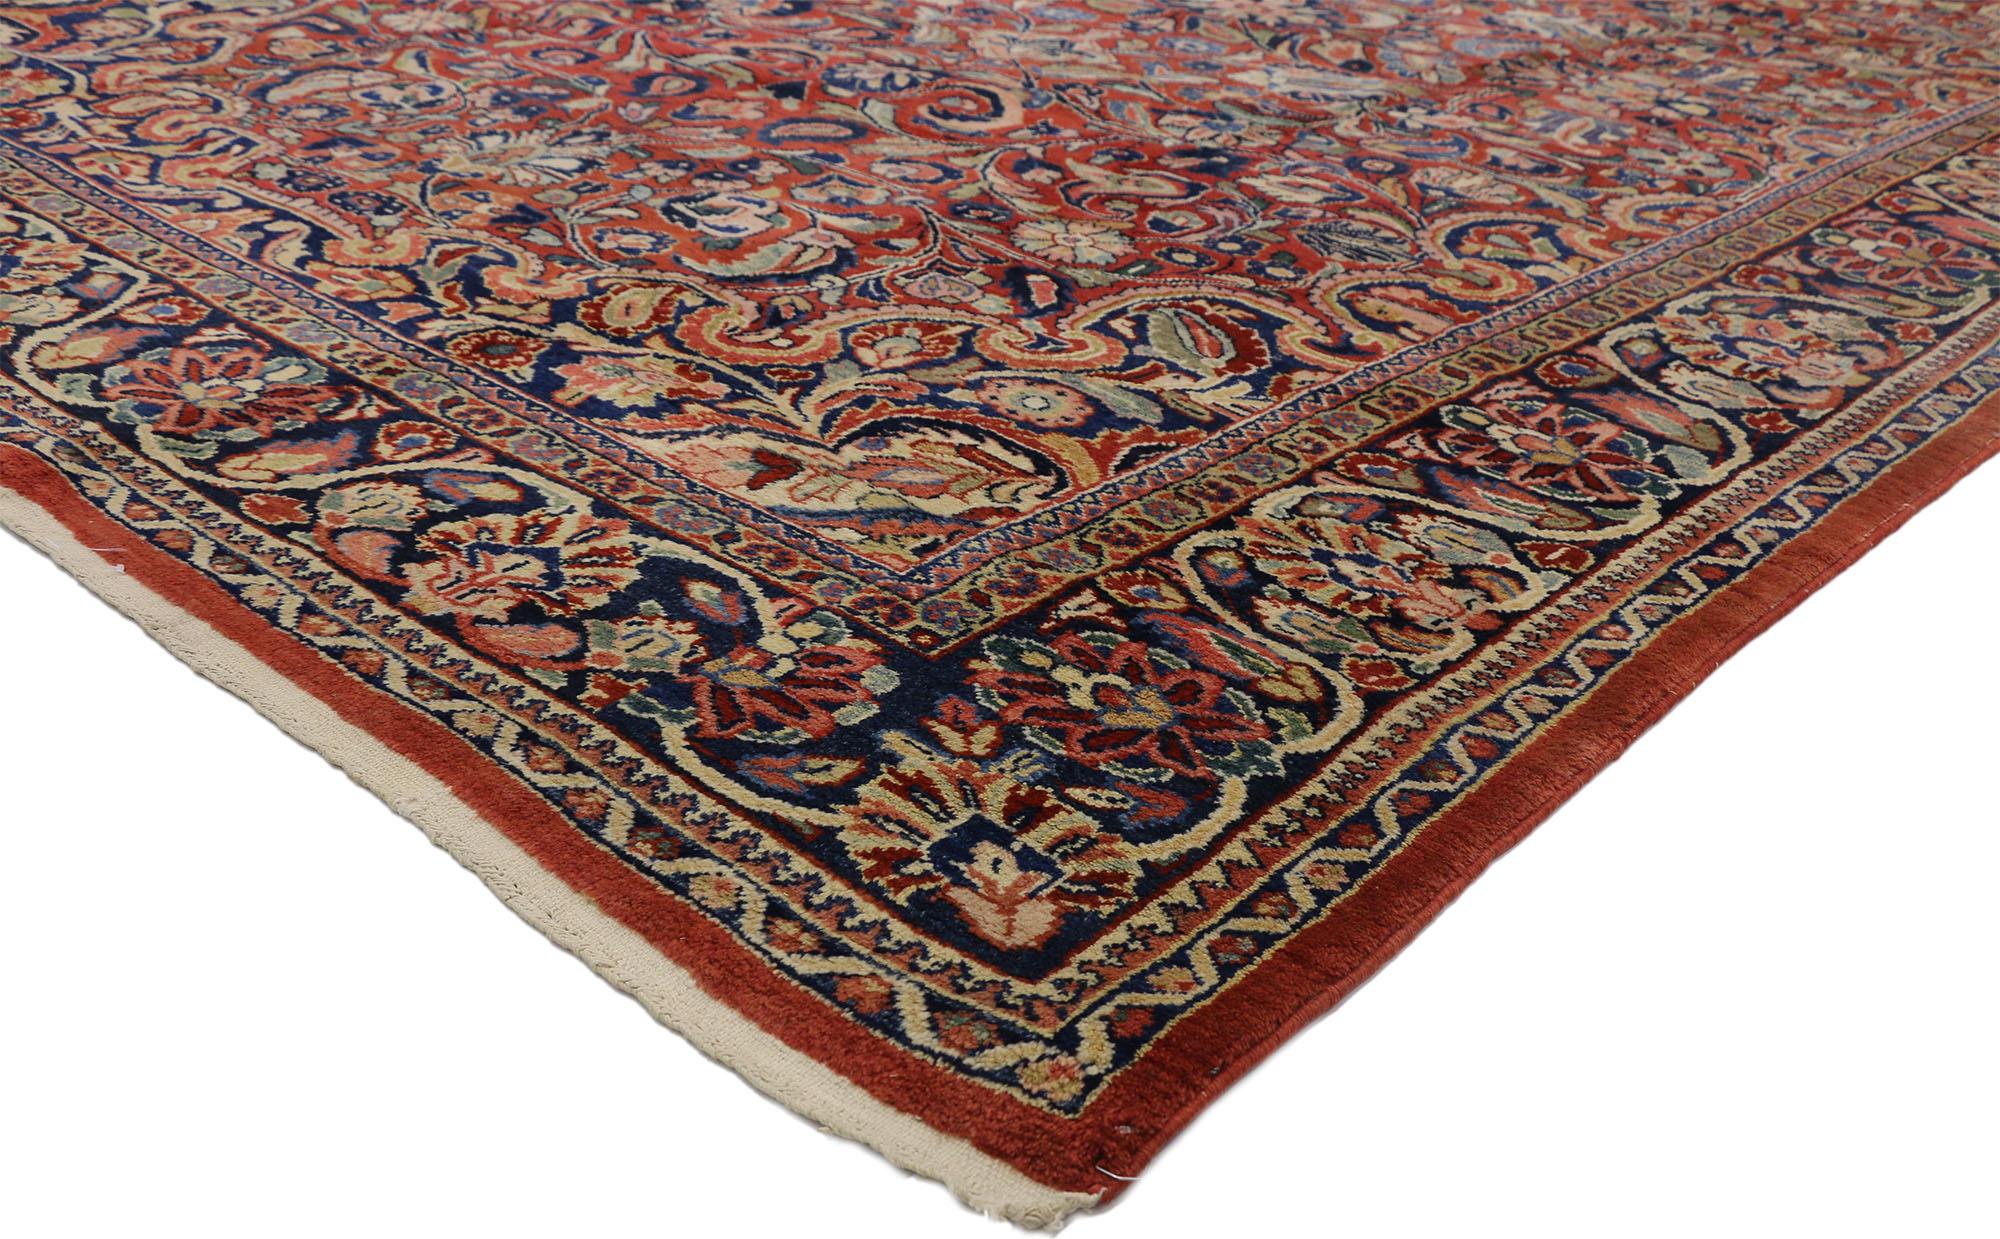 73385 Antique Persian Mahal Area Rug with Modern Federal Style 08'07 x 13'09. With its striking appeal and refined color palette, this hand-knotted wool antique Persian Mahal rug is poised to impress. The abrashed red field is covered in an all-over